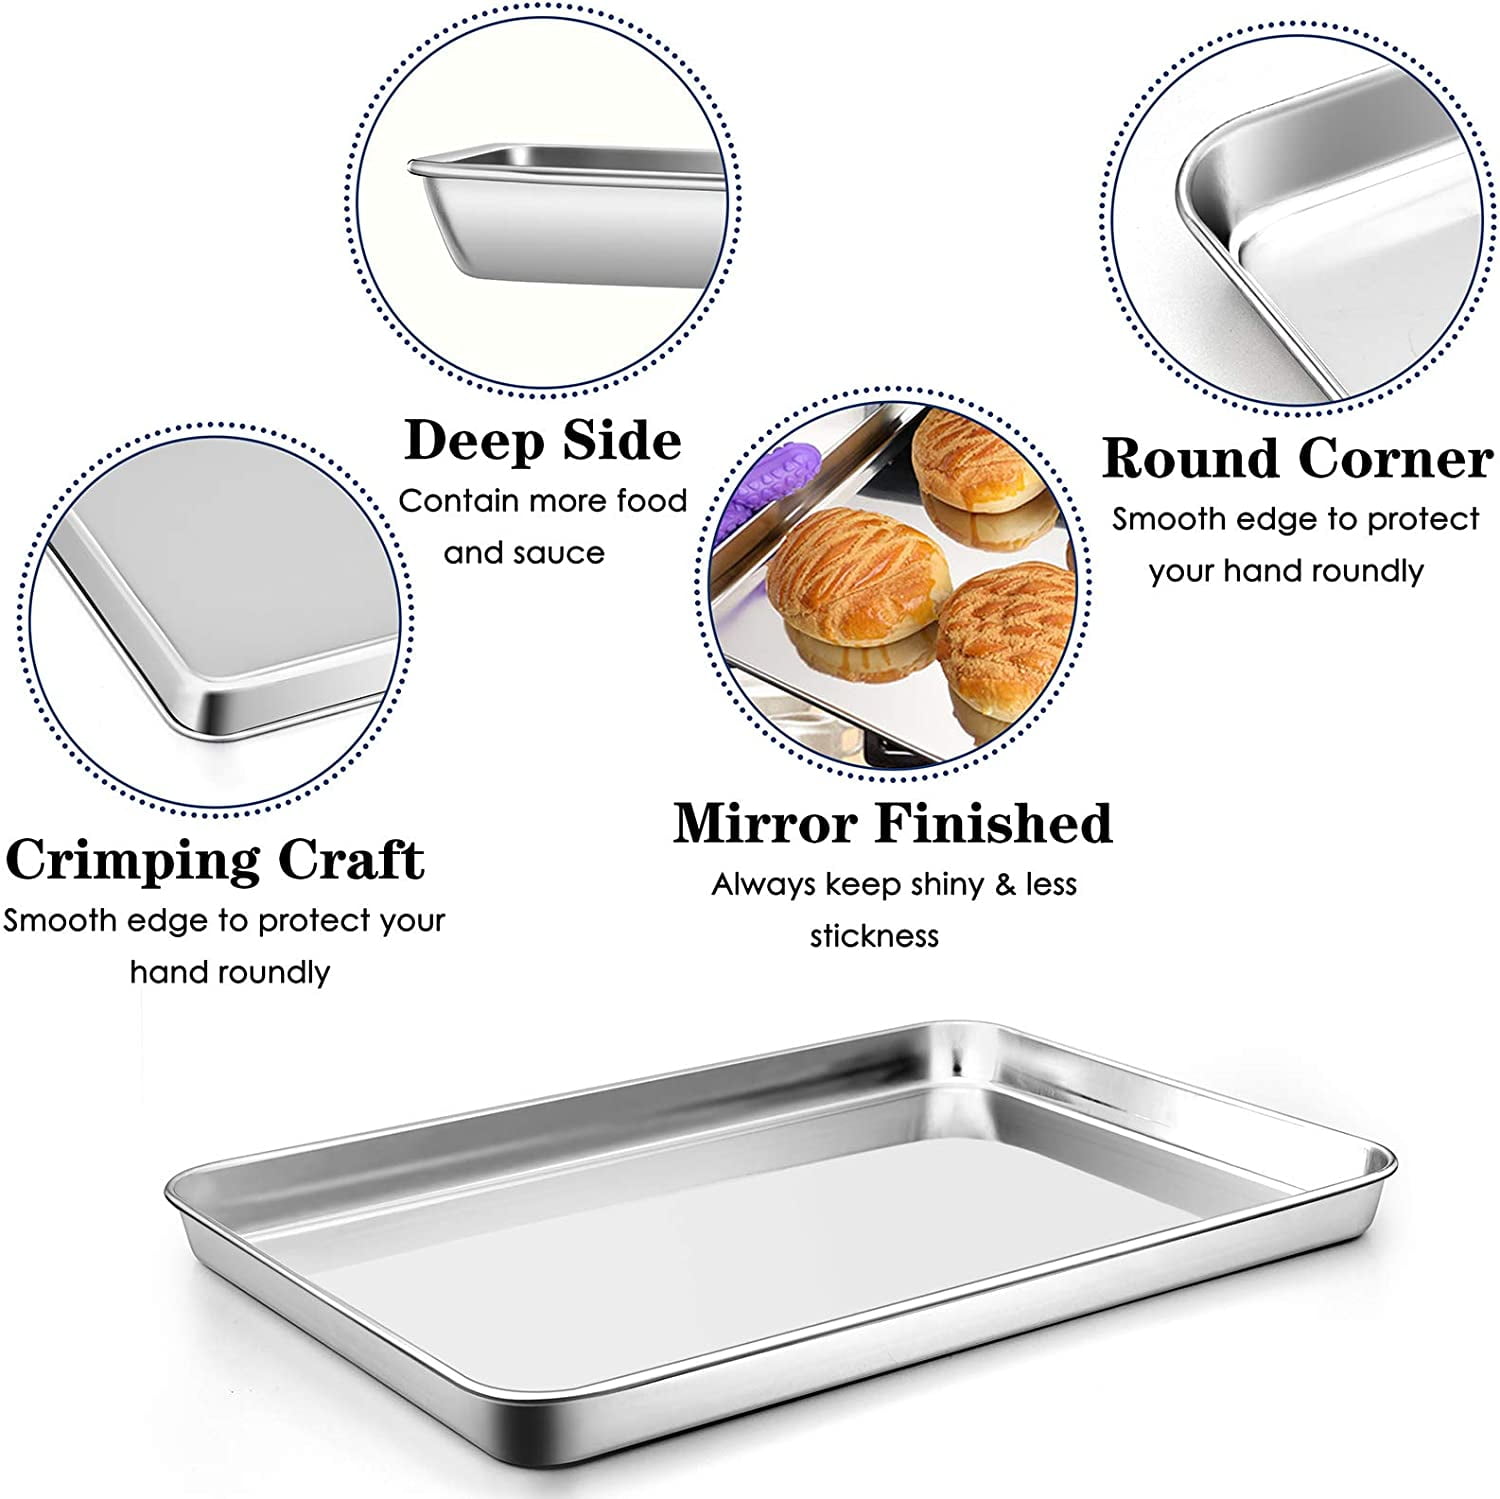 Coliware 16”x 12” Baking Pan Cookie Sheet Set of 2, Stainless Steel Rimmed  Half Sheet, Metal Flat Cooking Tray Pans for Oven Toasting